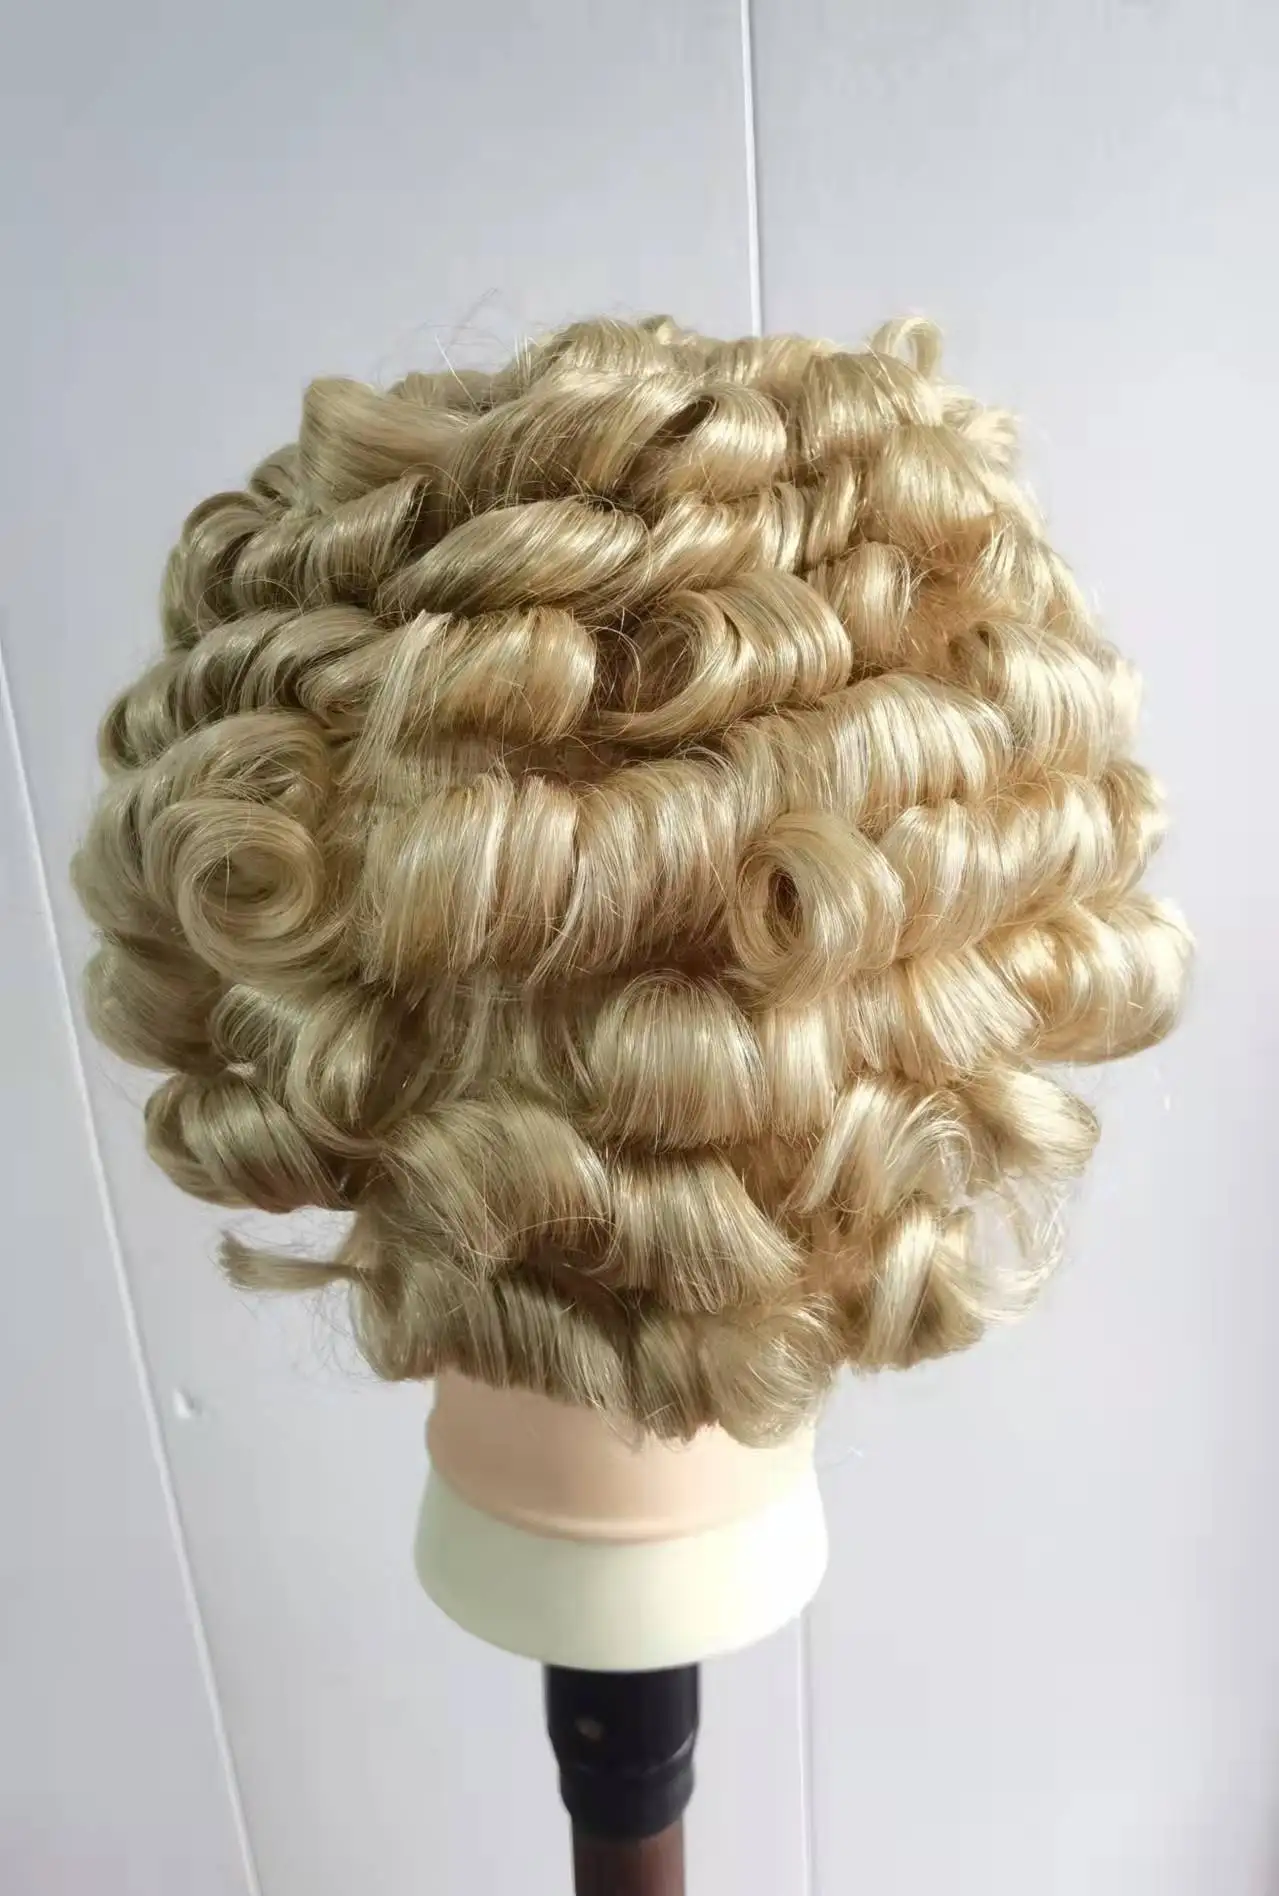 

YATUWIN 613 Blonde Pixie Cut Wig Short Curly Human Hair Wigs 13X1 Transparent Lace Wig For Women Cheap Curly Human Hair Wig